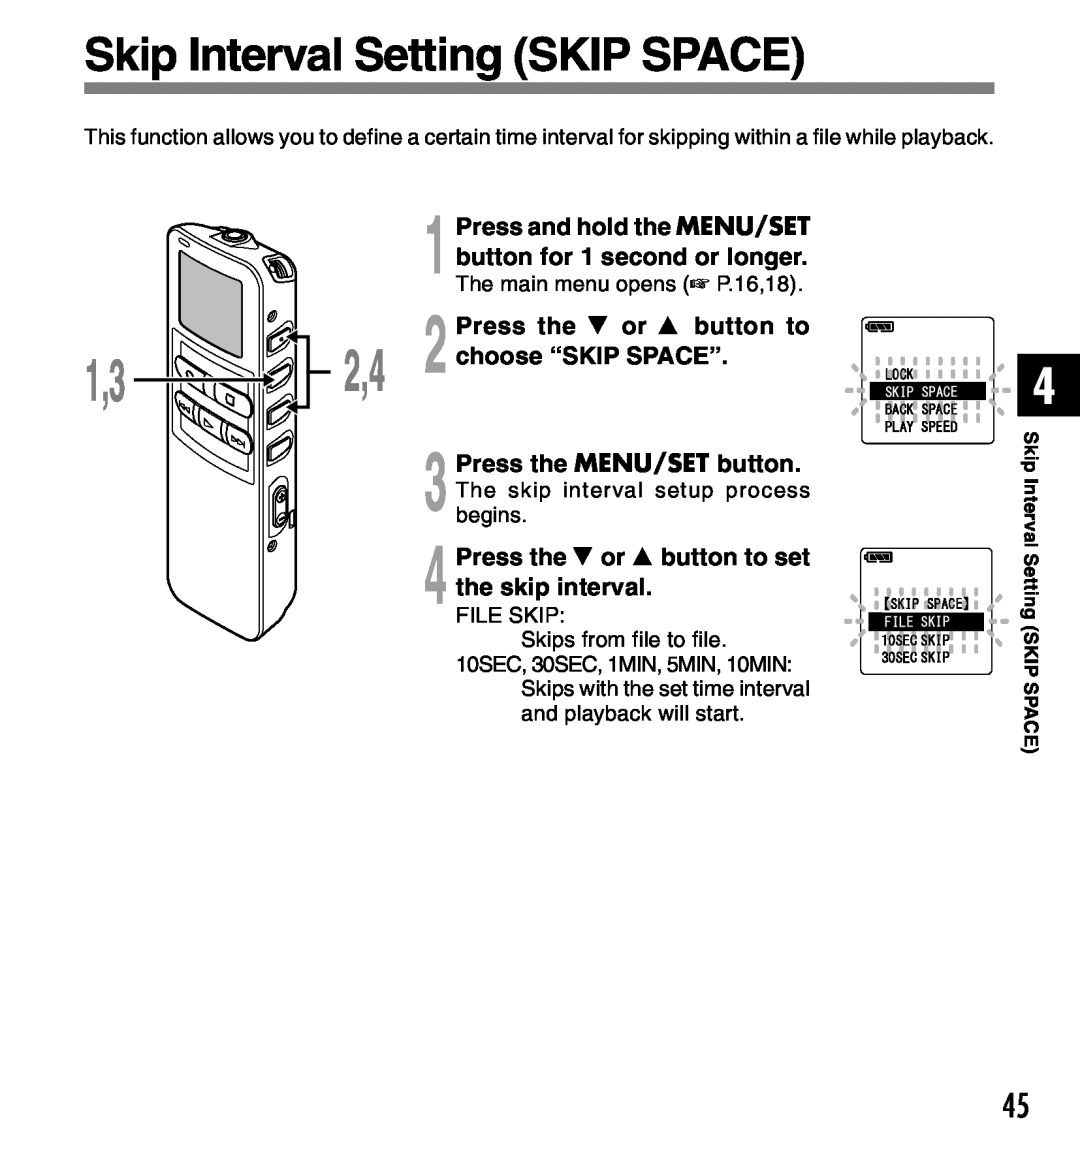 Olympus Skip Interval Setting SKIP SPACE, 2,4 2 choose “SKIP SPACE”, Press the 3 or 2 button to set the skip interval 